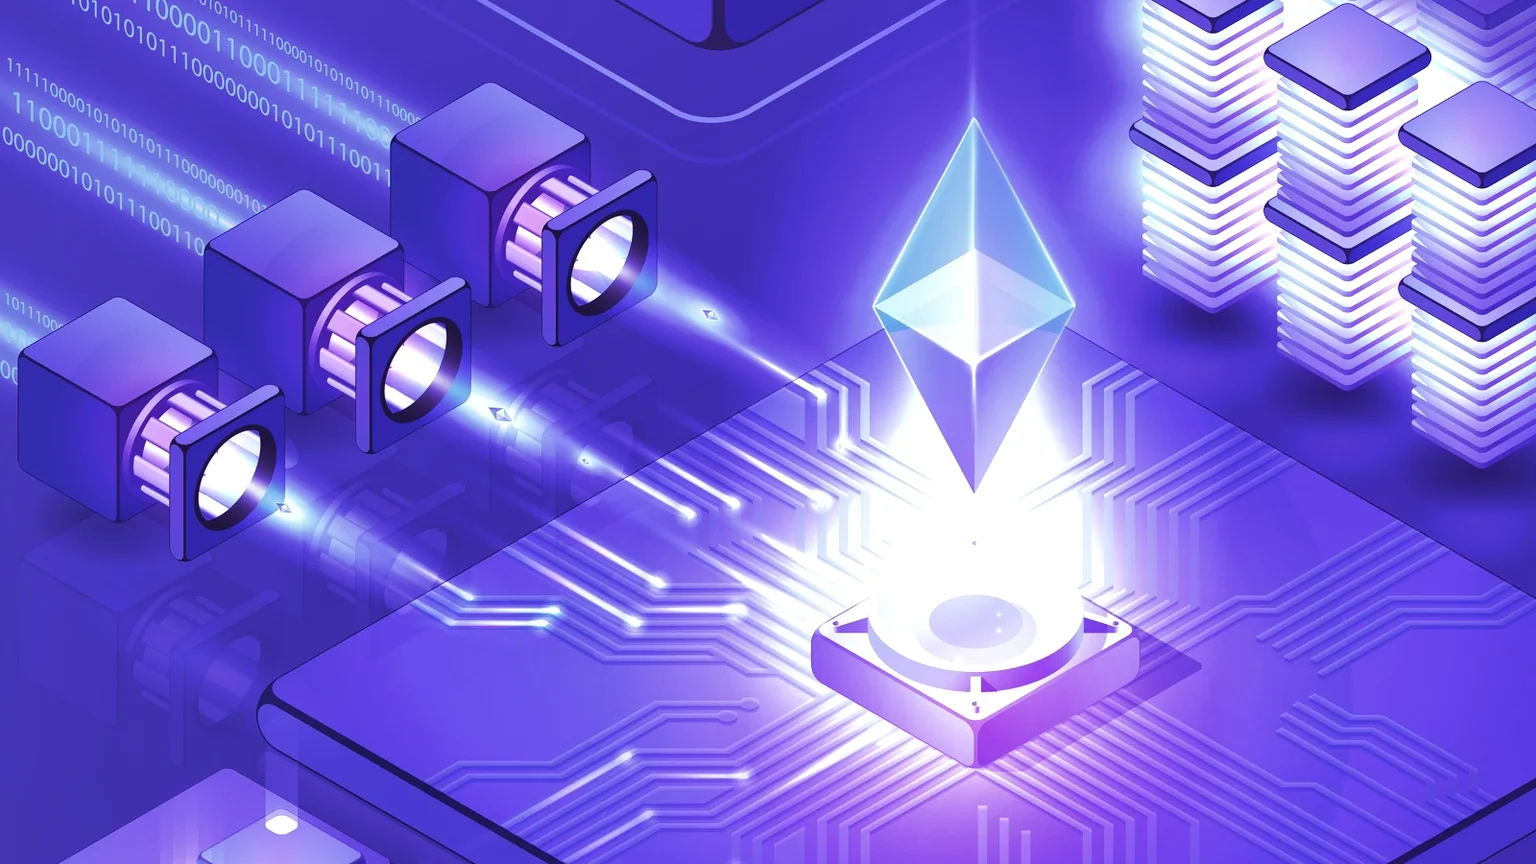 Ethereum 2.0 will see the network switch to a proof of stake consensus mechanism Image: Shutterstock